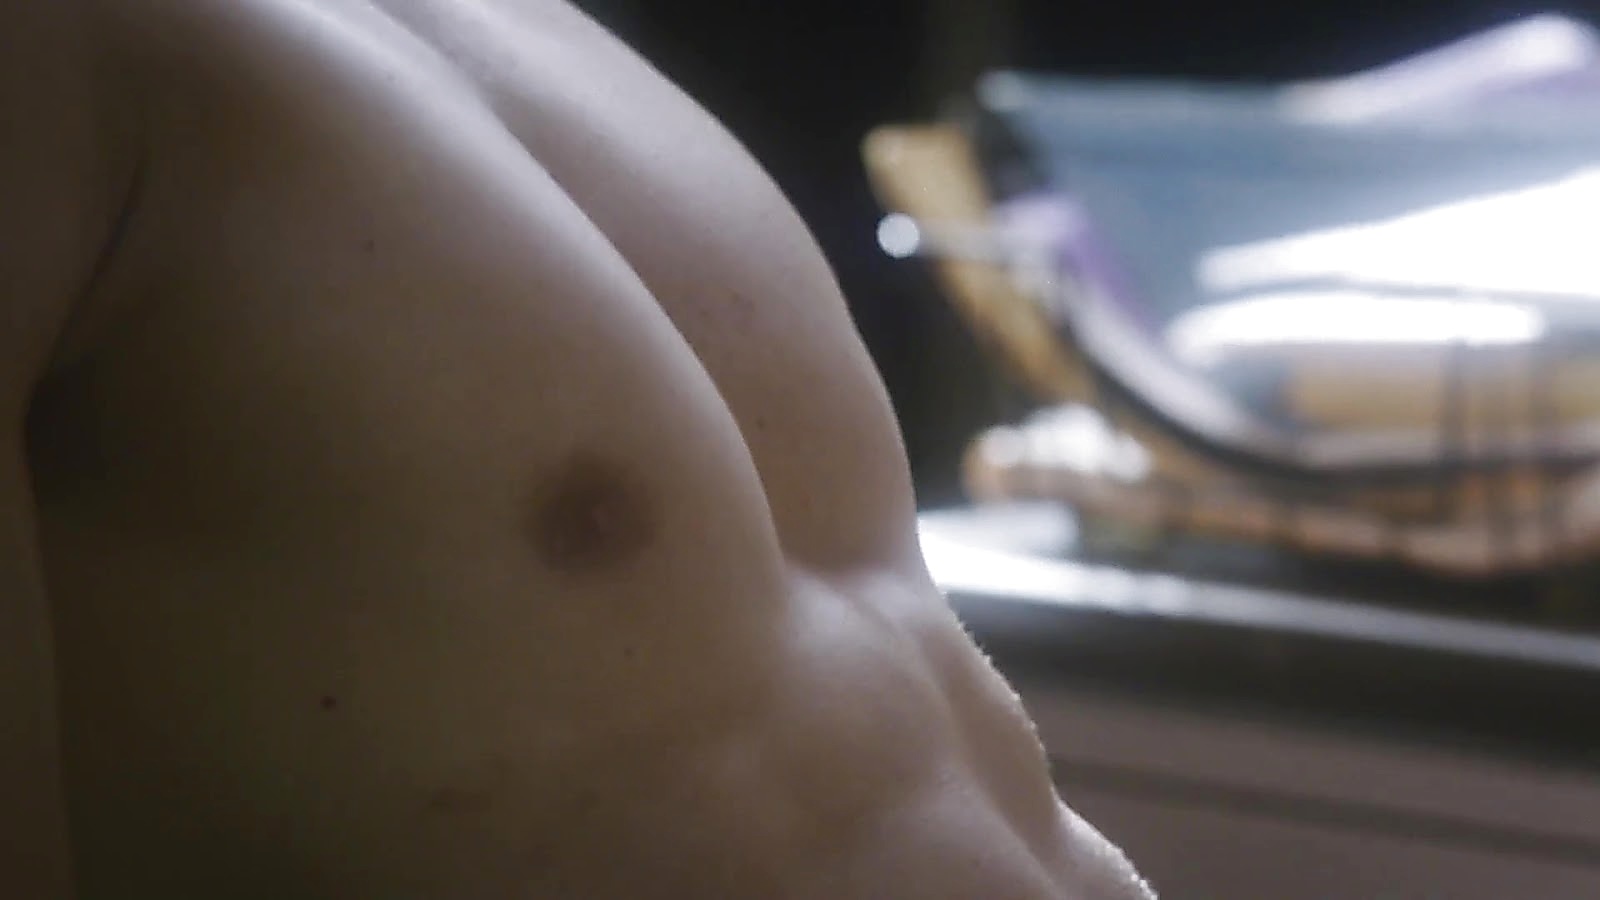 David A Gregory sexy shirtless scene June 2, 2020, 5am